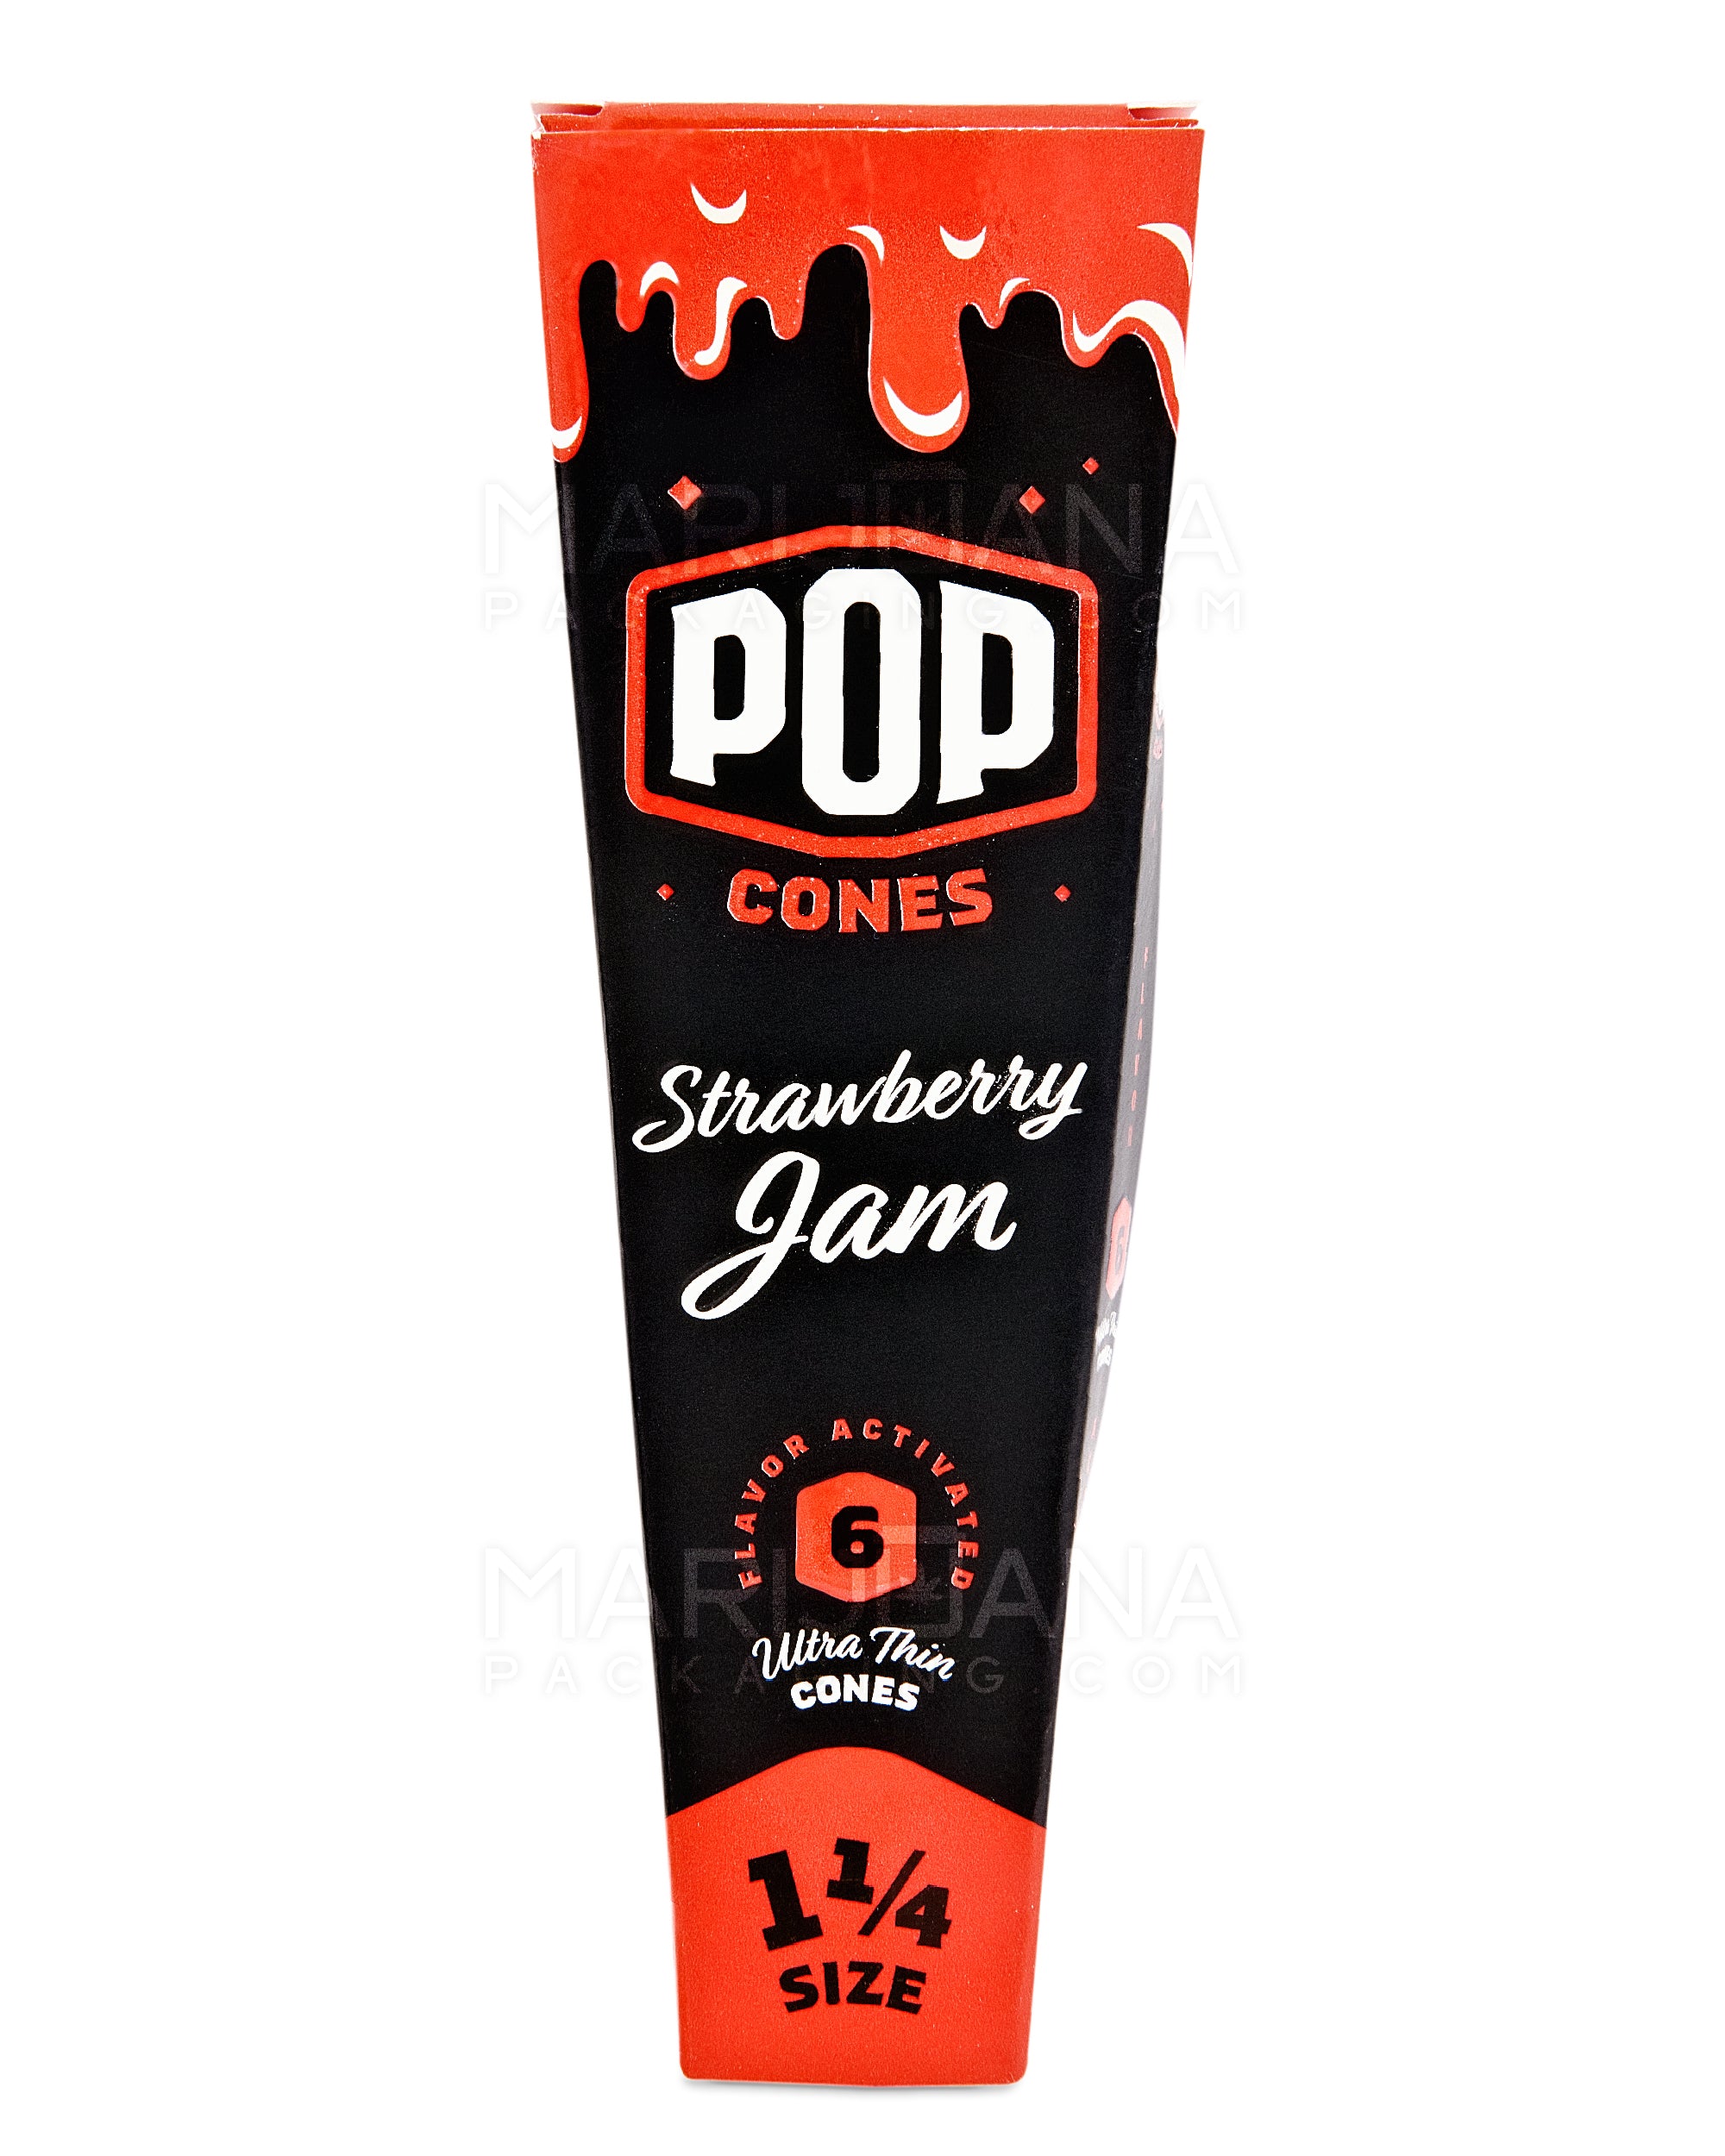 POP CONES | 'Retail Display' 1 1/4 Size Pre-Rolled Cones | 84mm - Strawberry Jam - 24 Count - 2